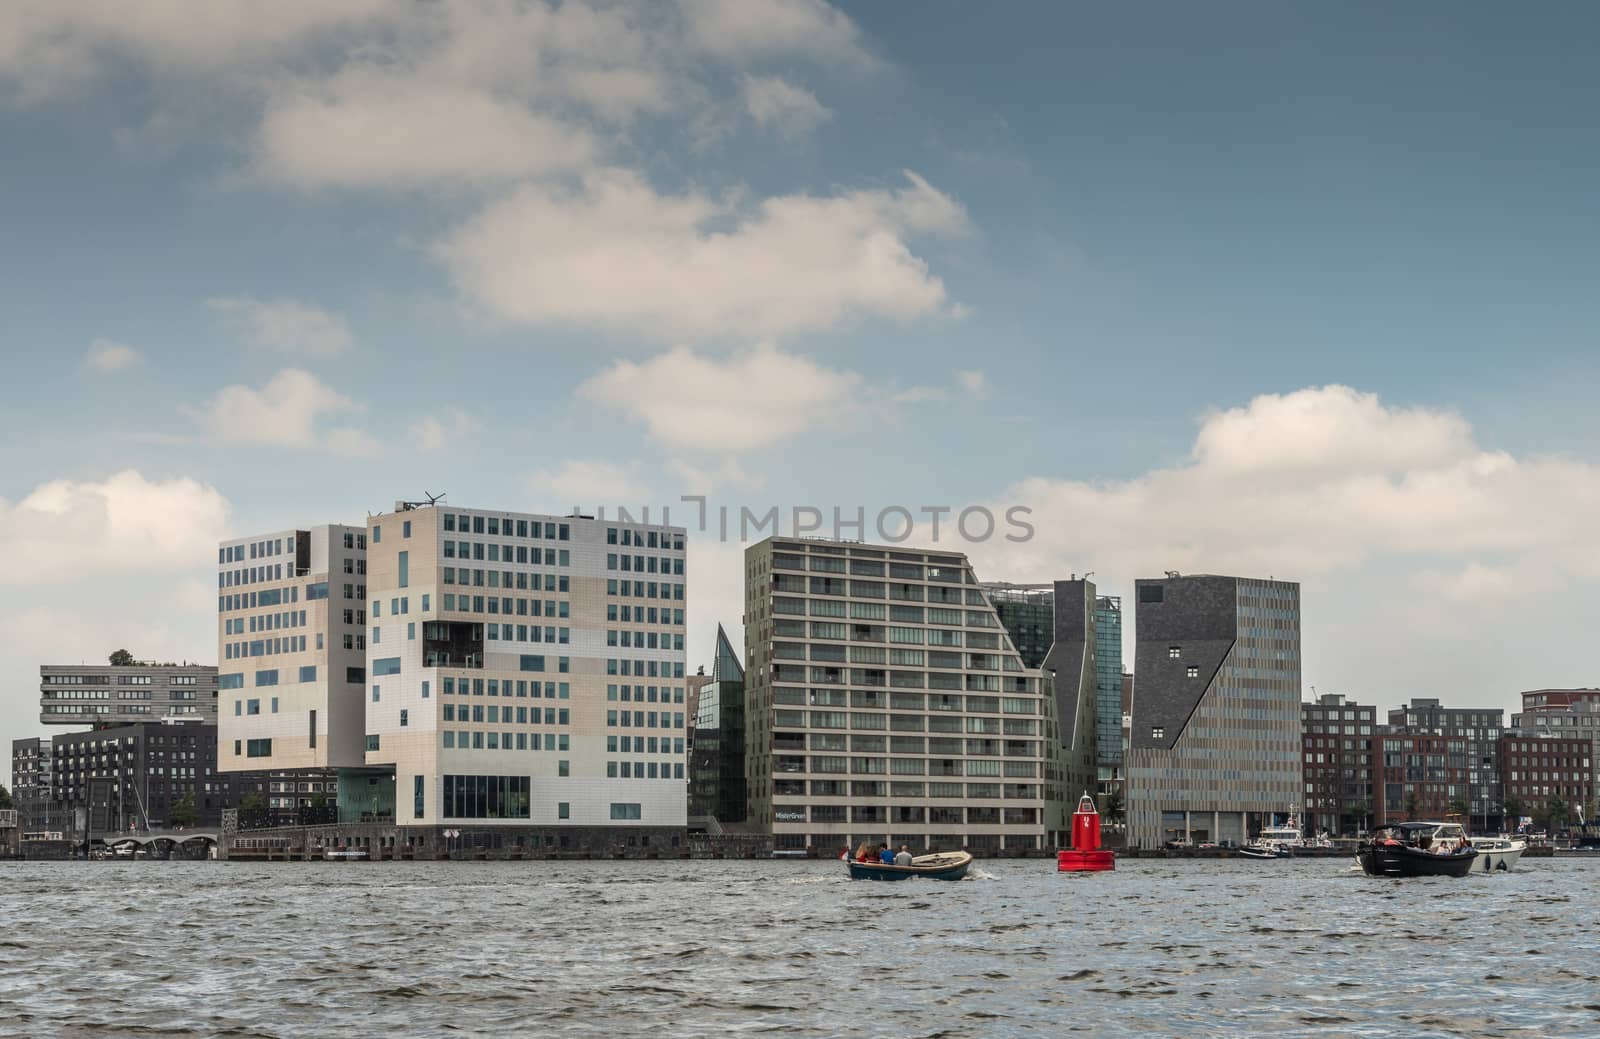 Amsterdam, the Netherlands - June 30, 2019: Cubic modern architecture of white large Justice Palace on IJdok under blue sky with white clouds. Other office buildings. Pedestrian bridge and IJ water.